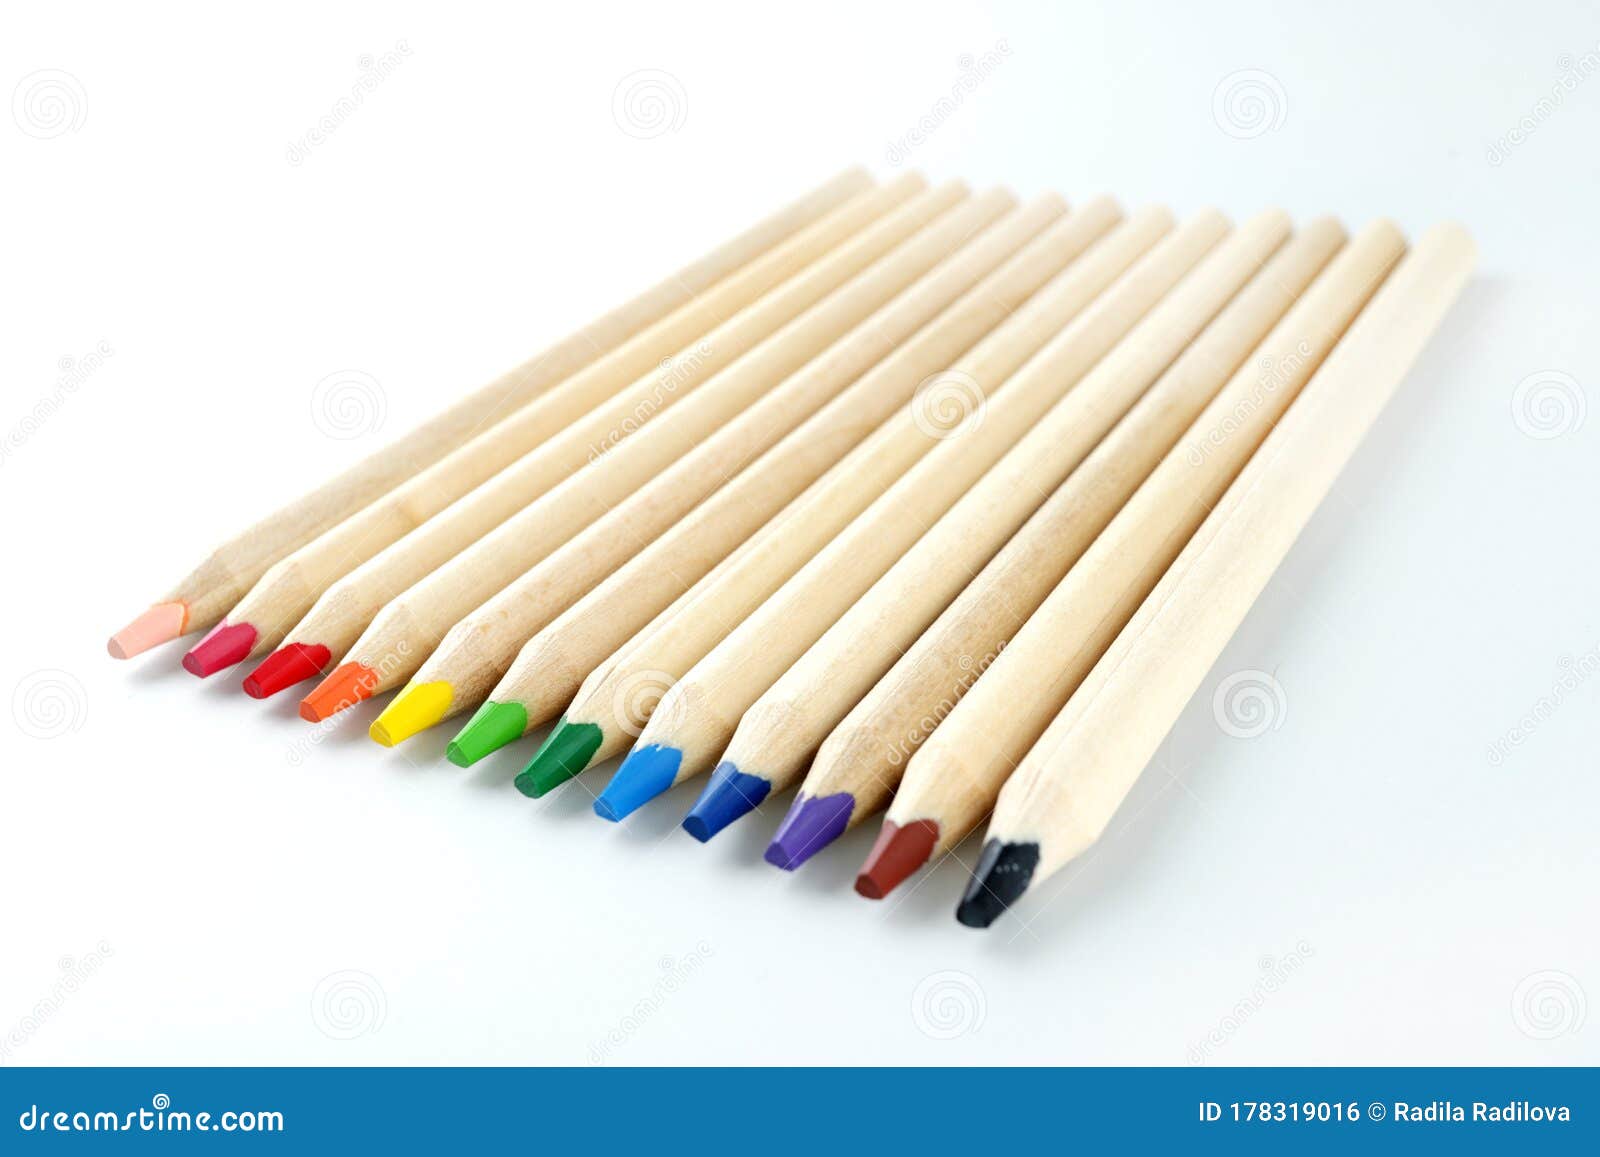 377 Color Pencils Sketchbook Wooden Table Stock Photos - Free &  Royalty-Free Stock Photos from Dreamstime